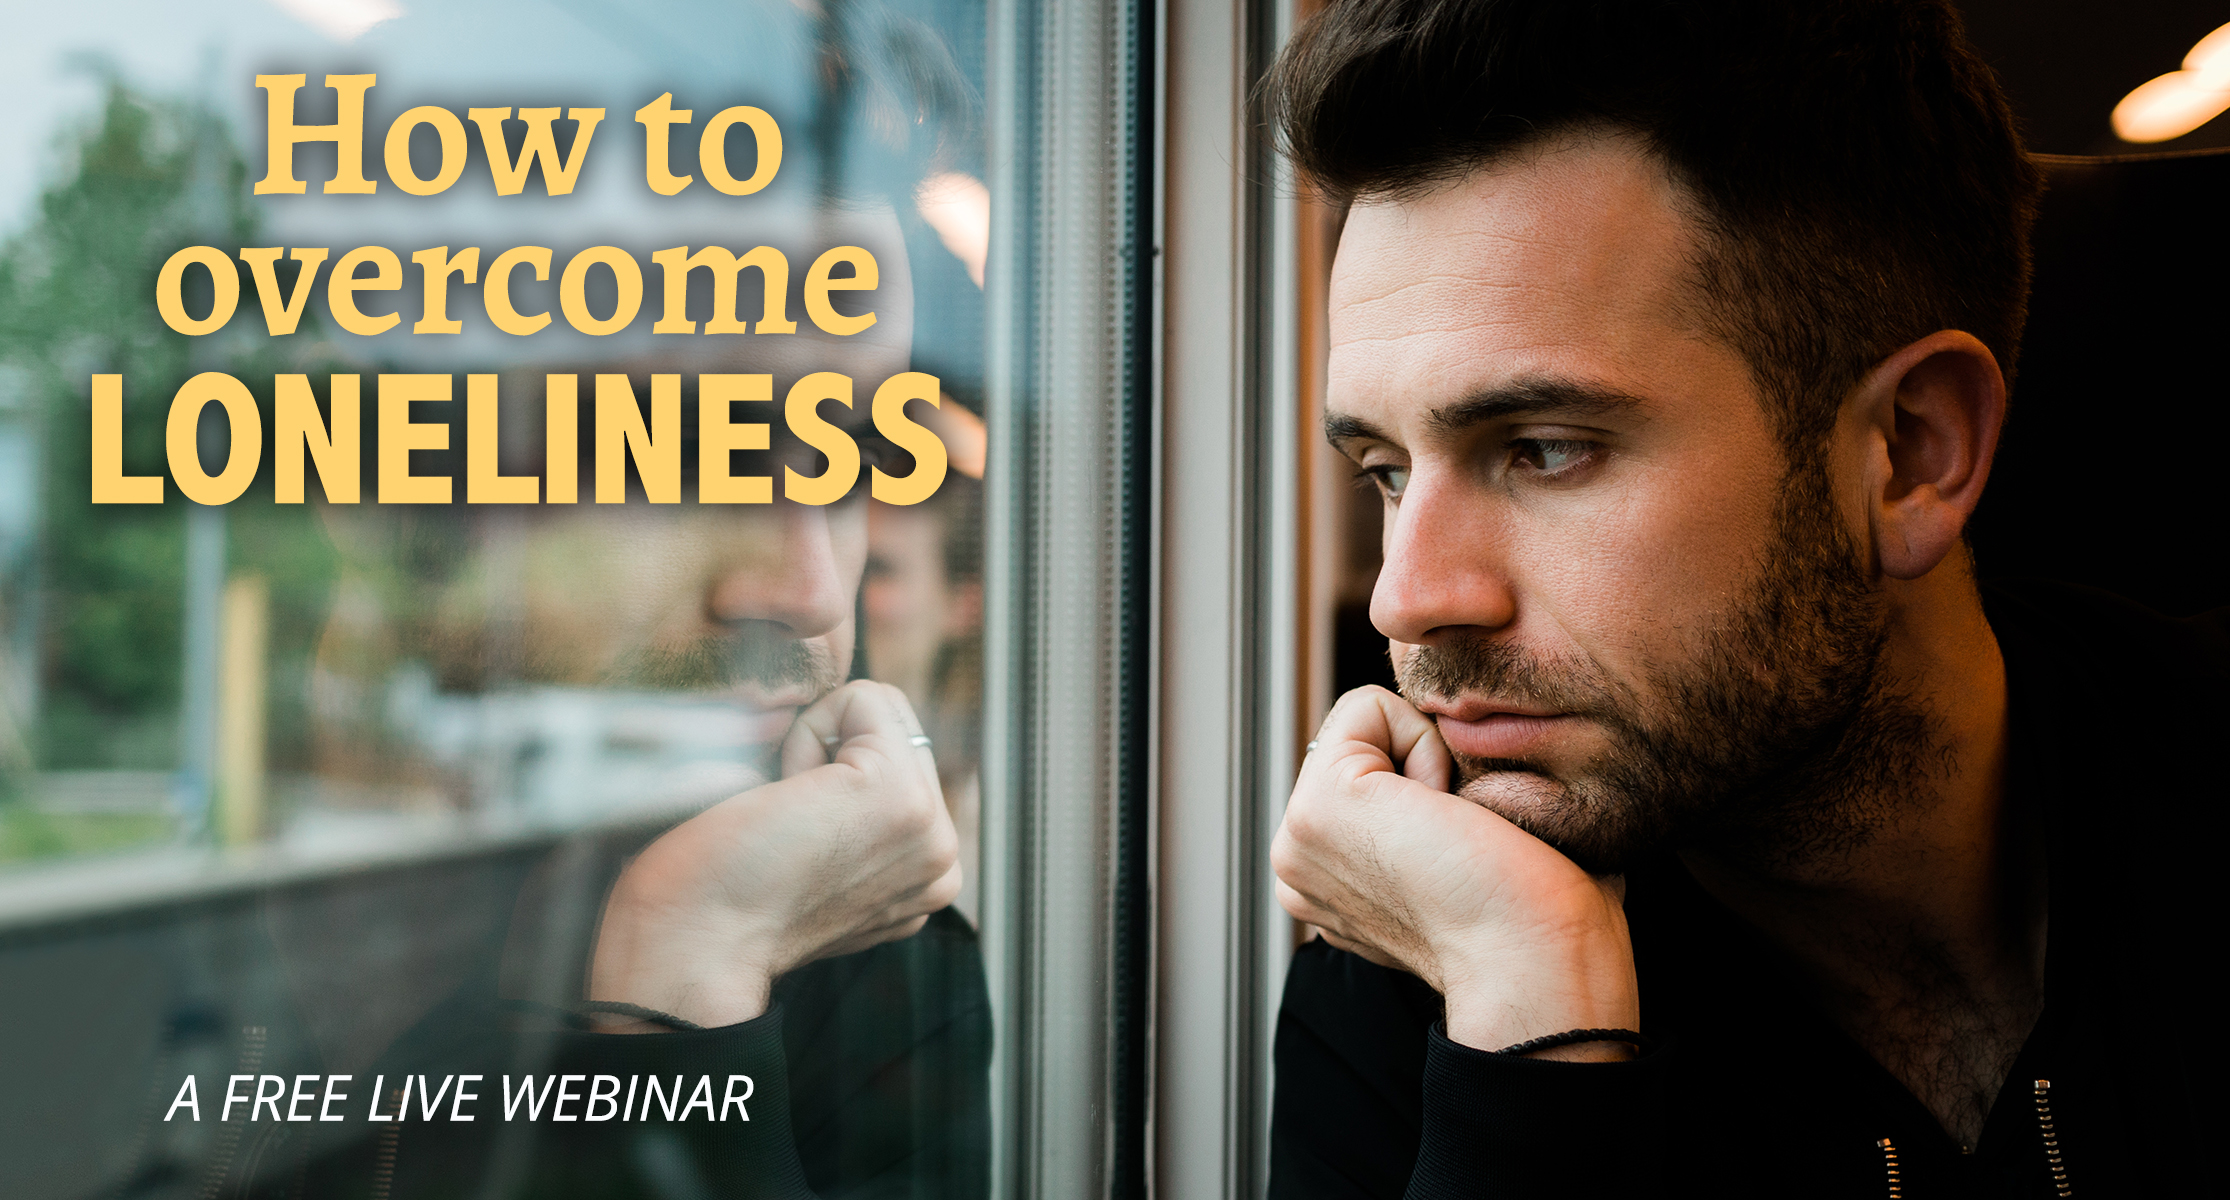 How To Overcome Loneliness